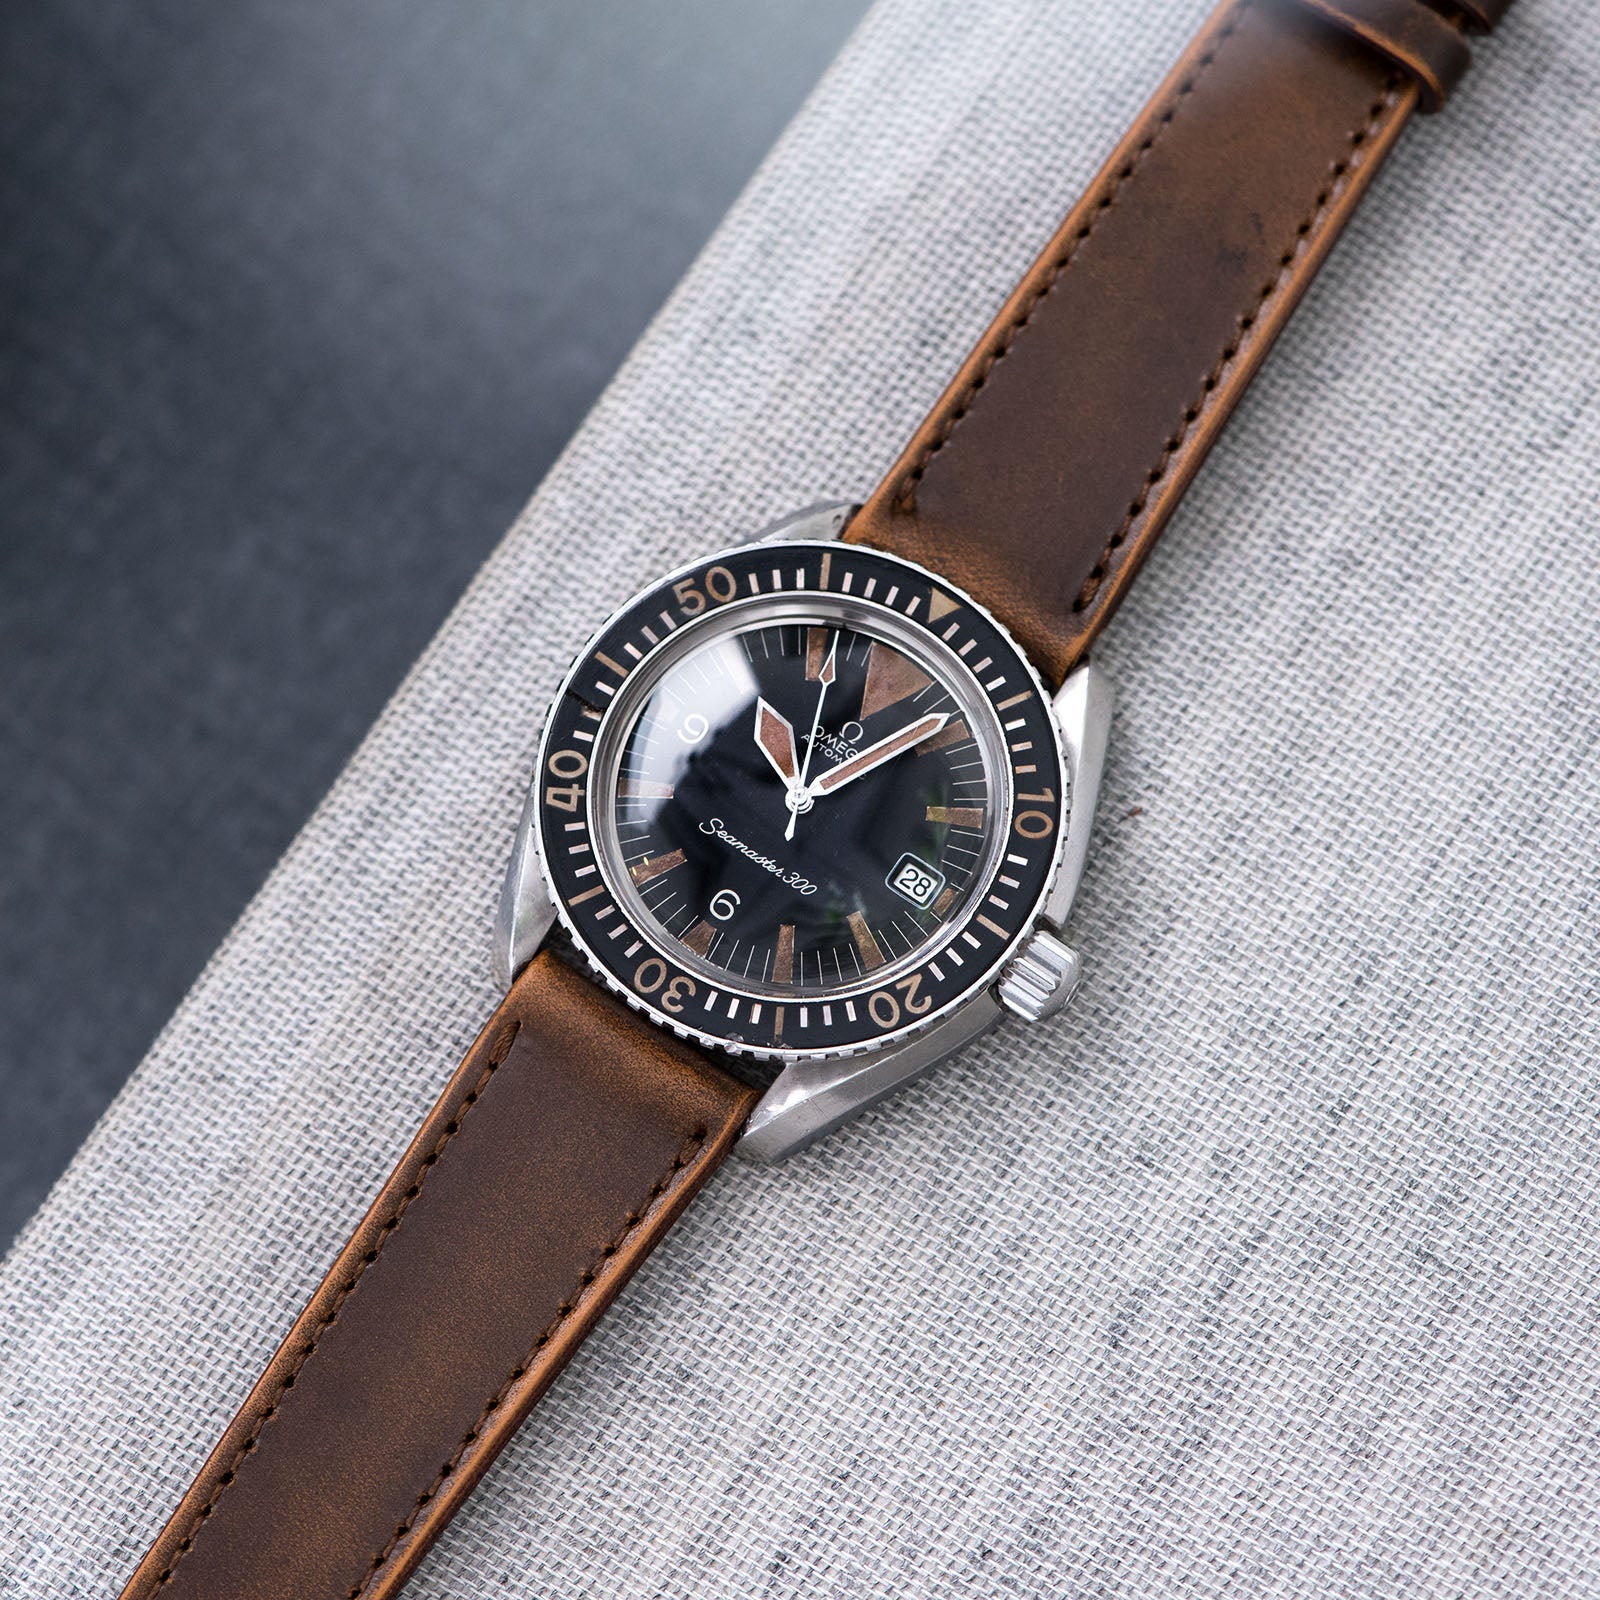 Bulang and Sons_Strap Guide_The omega SM 300 Seamaster_Degrade Honey Brown Leather Watch Strap